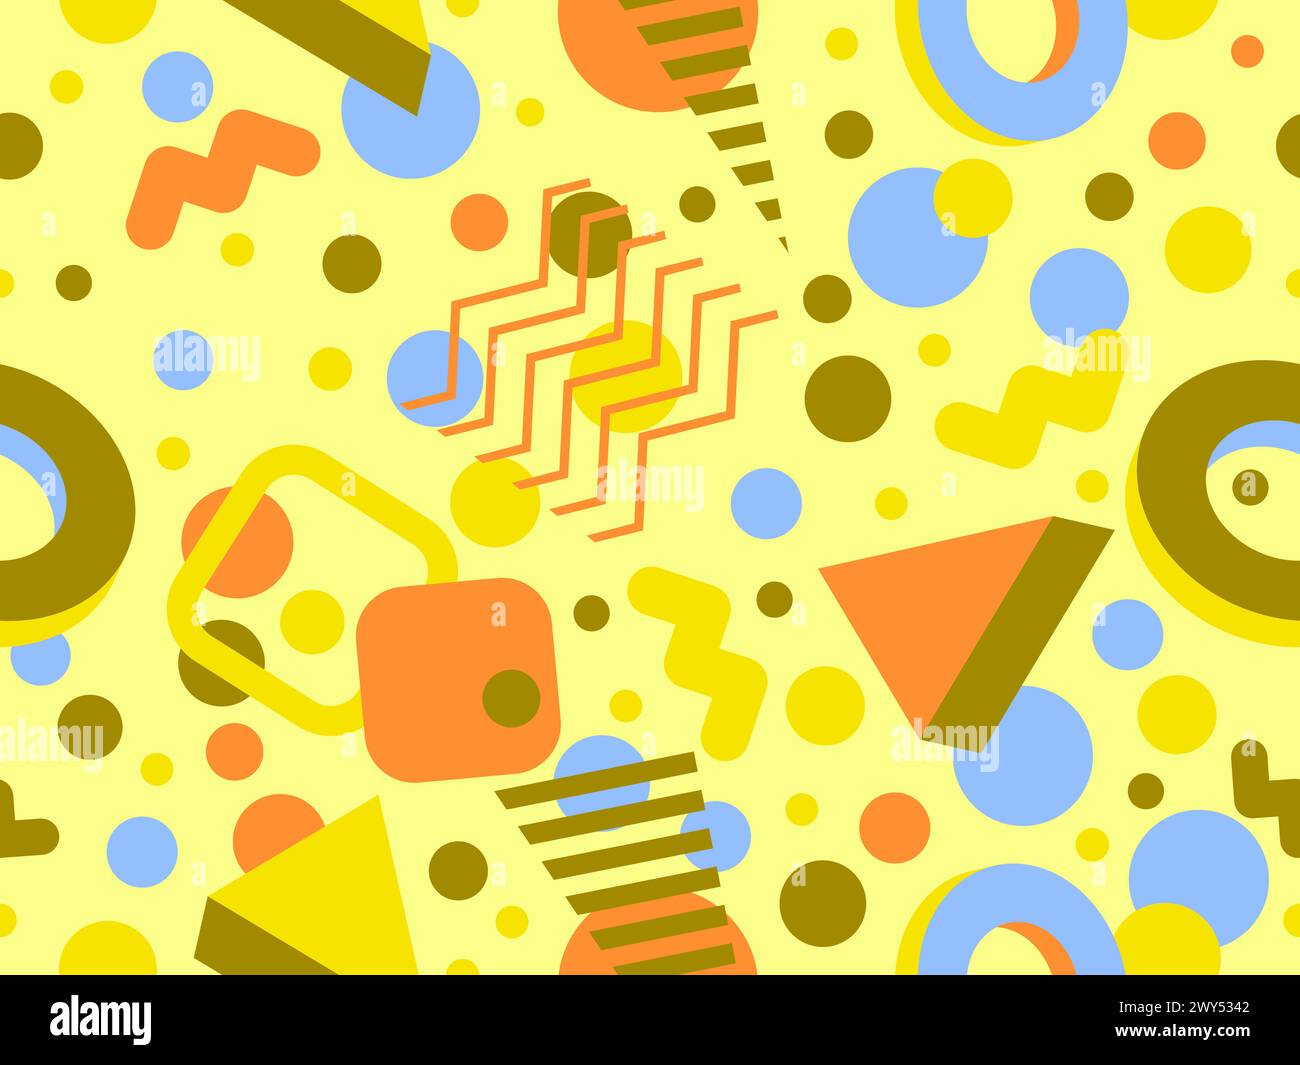 Geometric seamless pattern with 3D shapes in the style of the 80s and 90s. Isometric 3D shapes in Memphis style. Design of promotional products, wrapp Stock Vector